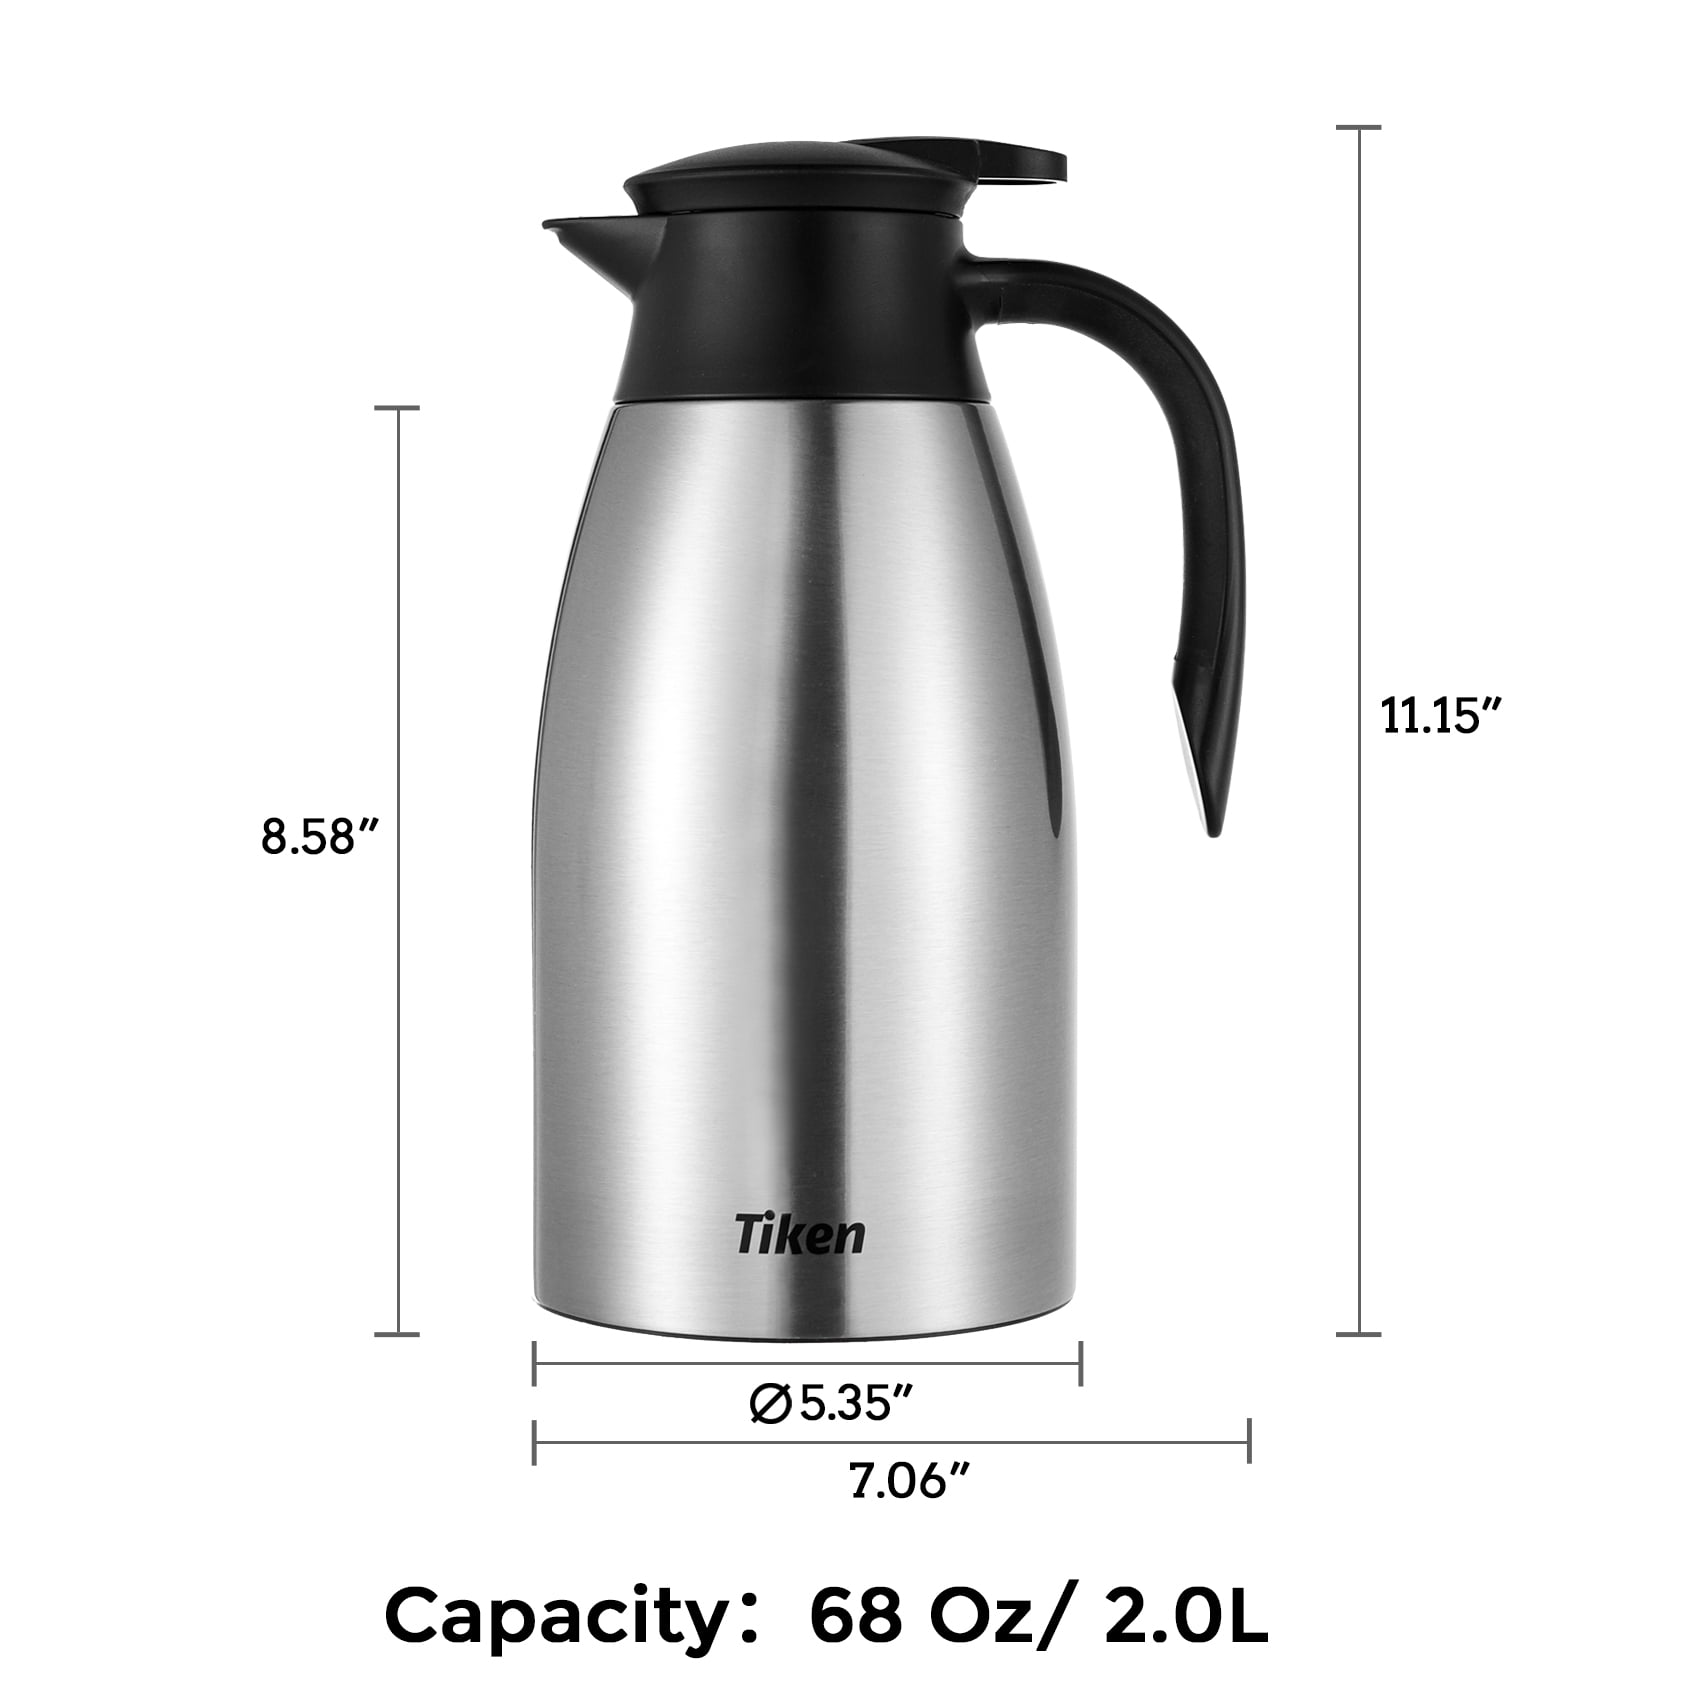 Vermida iSH09-M609529mn 68 Oz Thermal Coffee Carafe,2 Liter Stainless Steel  Thermos Carafe,Double Wall Insulated Coffee Server,Sealed Coffee Thermos Di